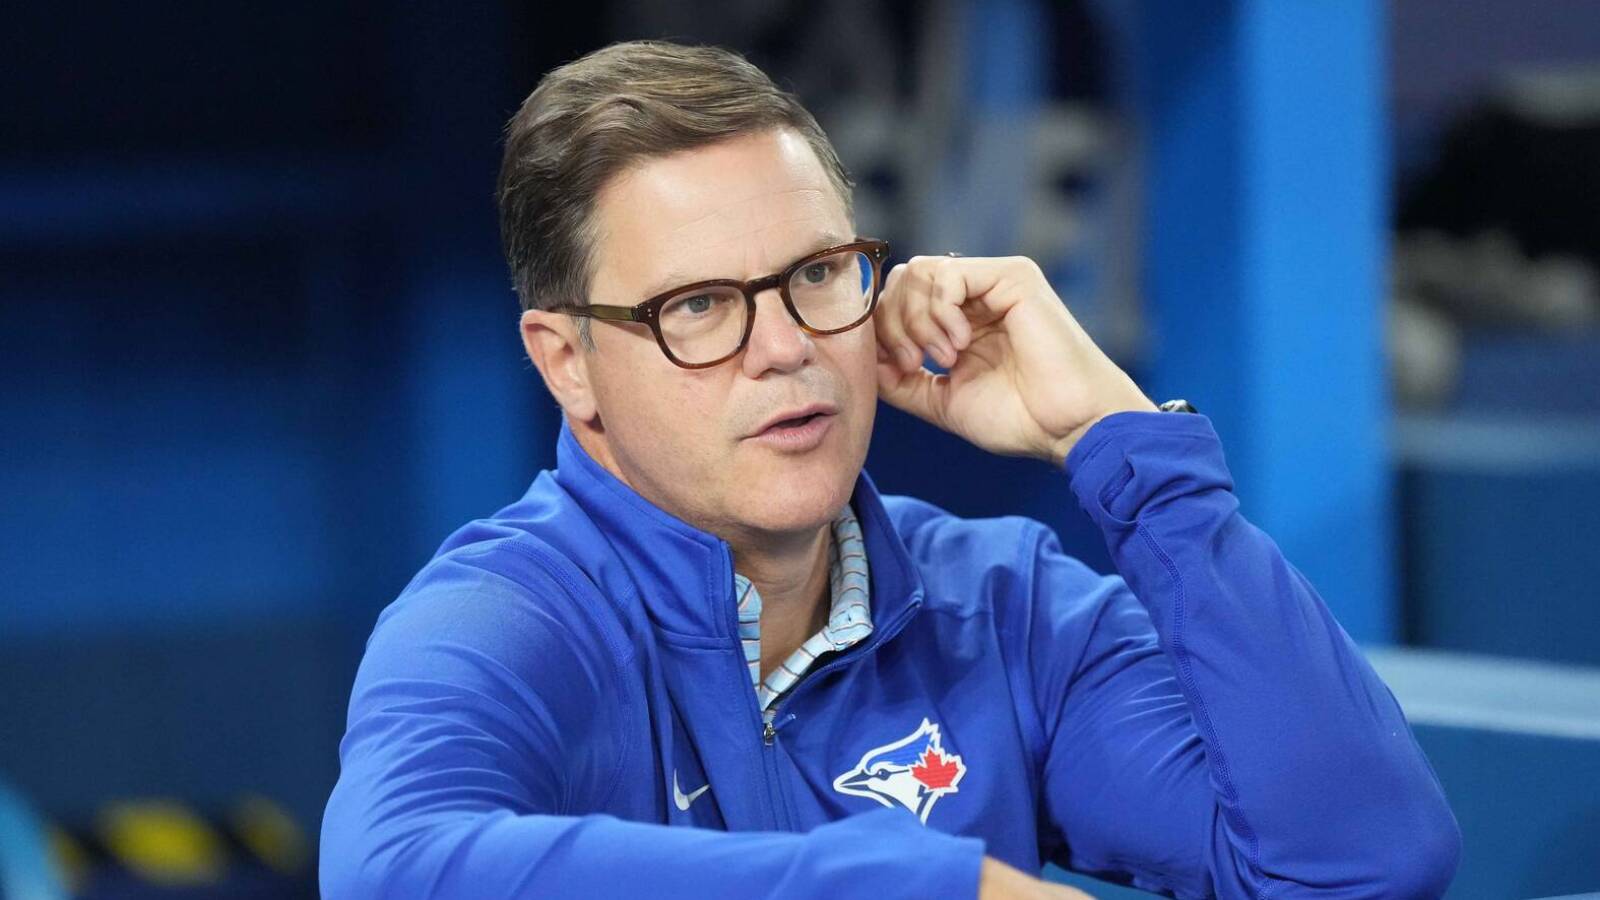 Blue Jays GM discusses offseason: 'We feel good about the team that we have'